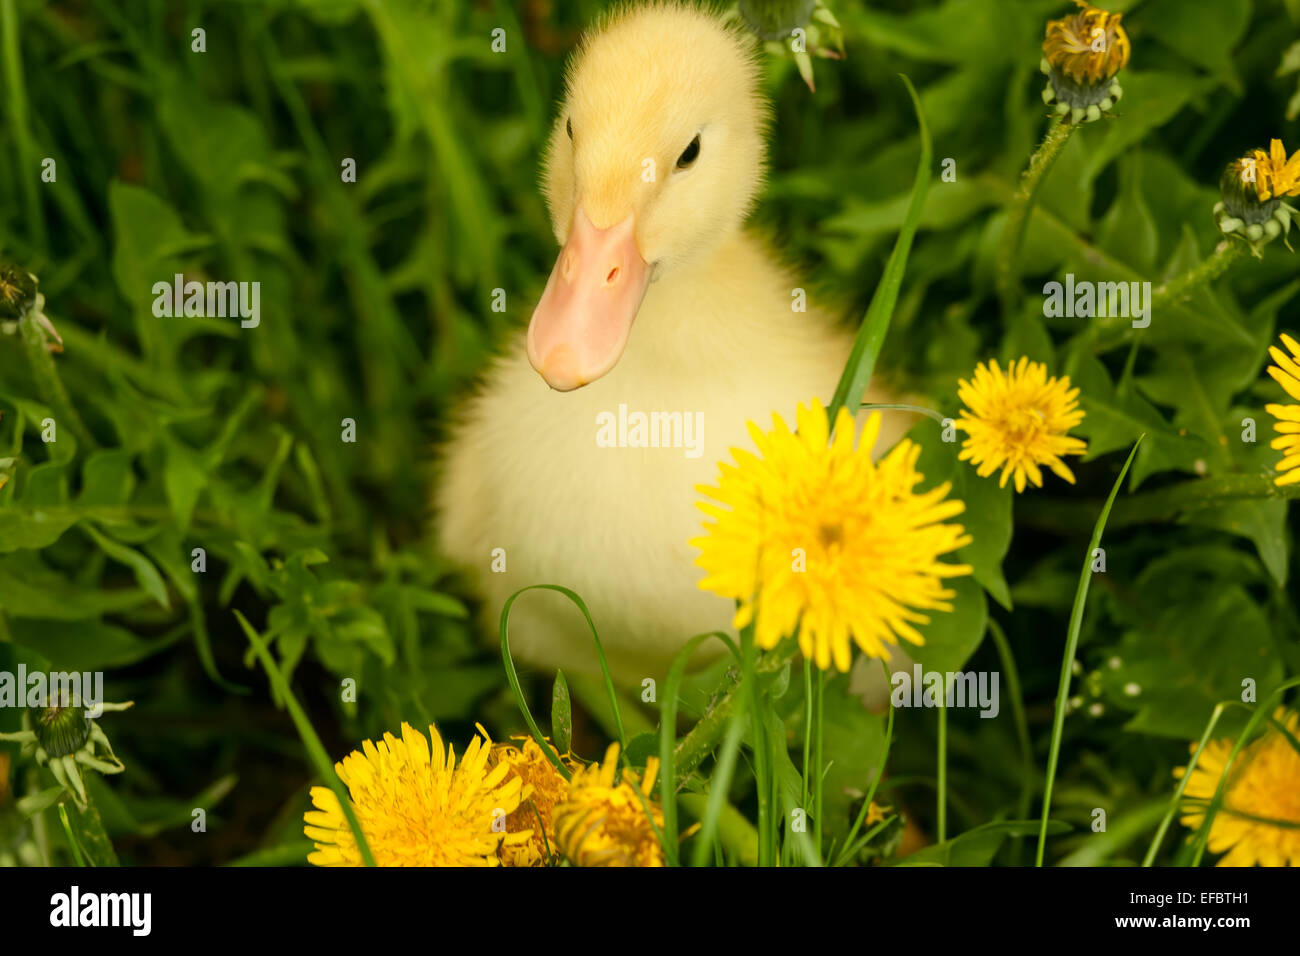 Small duckling Stock Photo